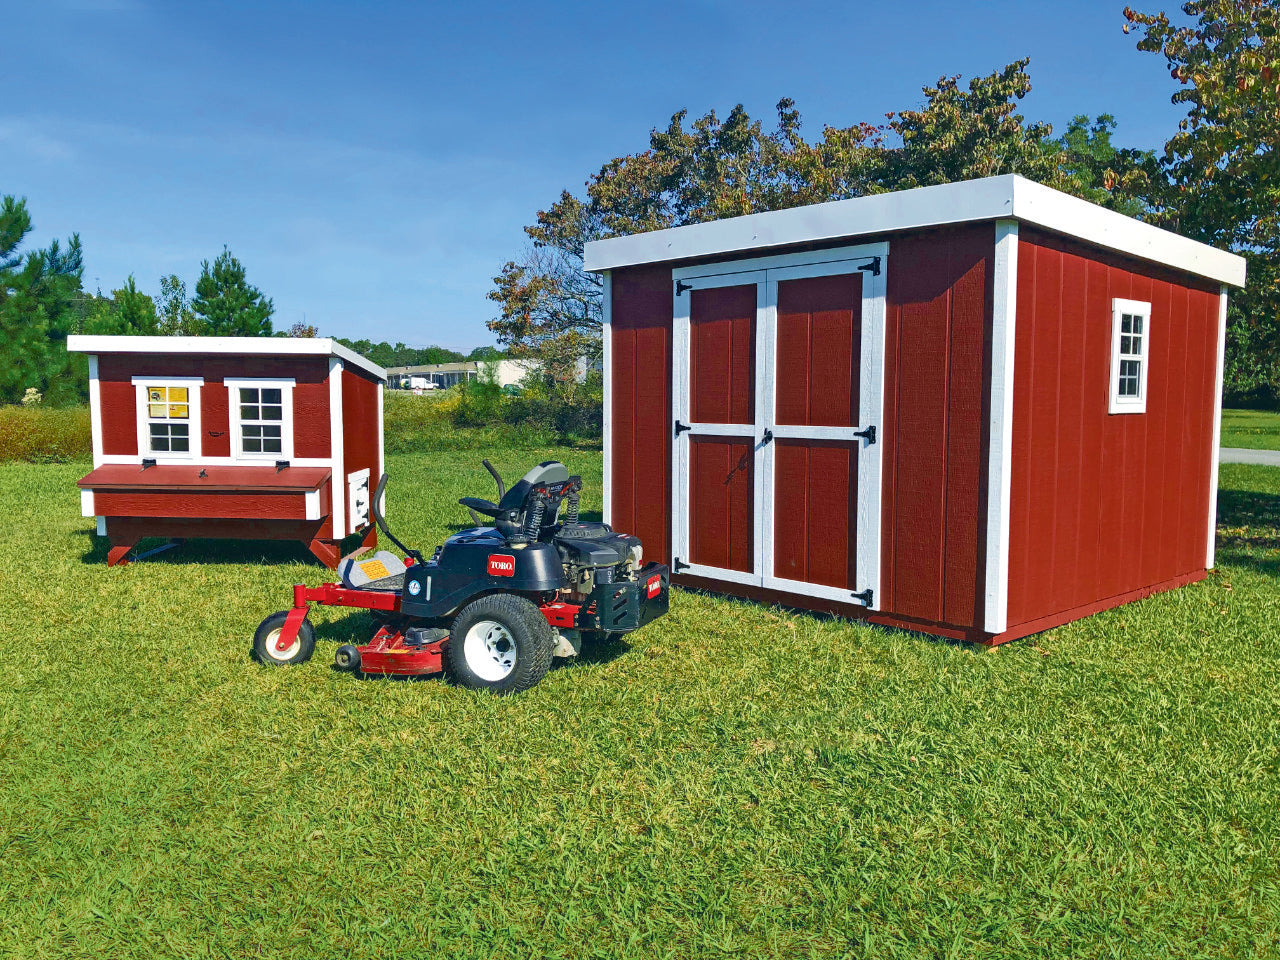 Shed Kit in a Box with lawn mower storage next to a large OverEZ Chicken Coop